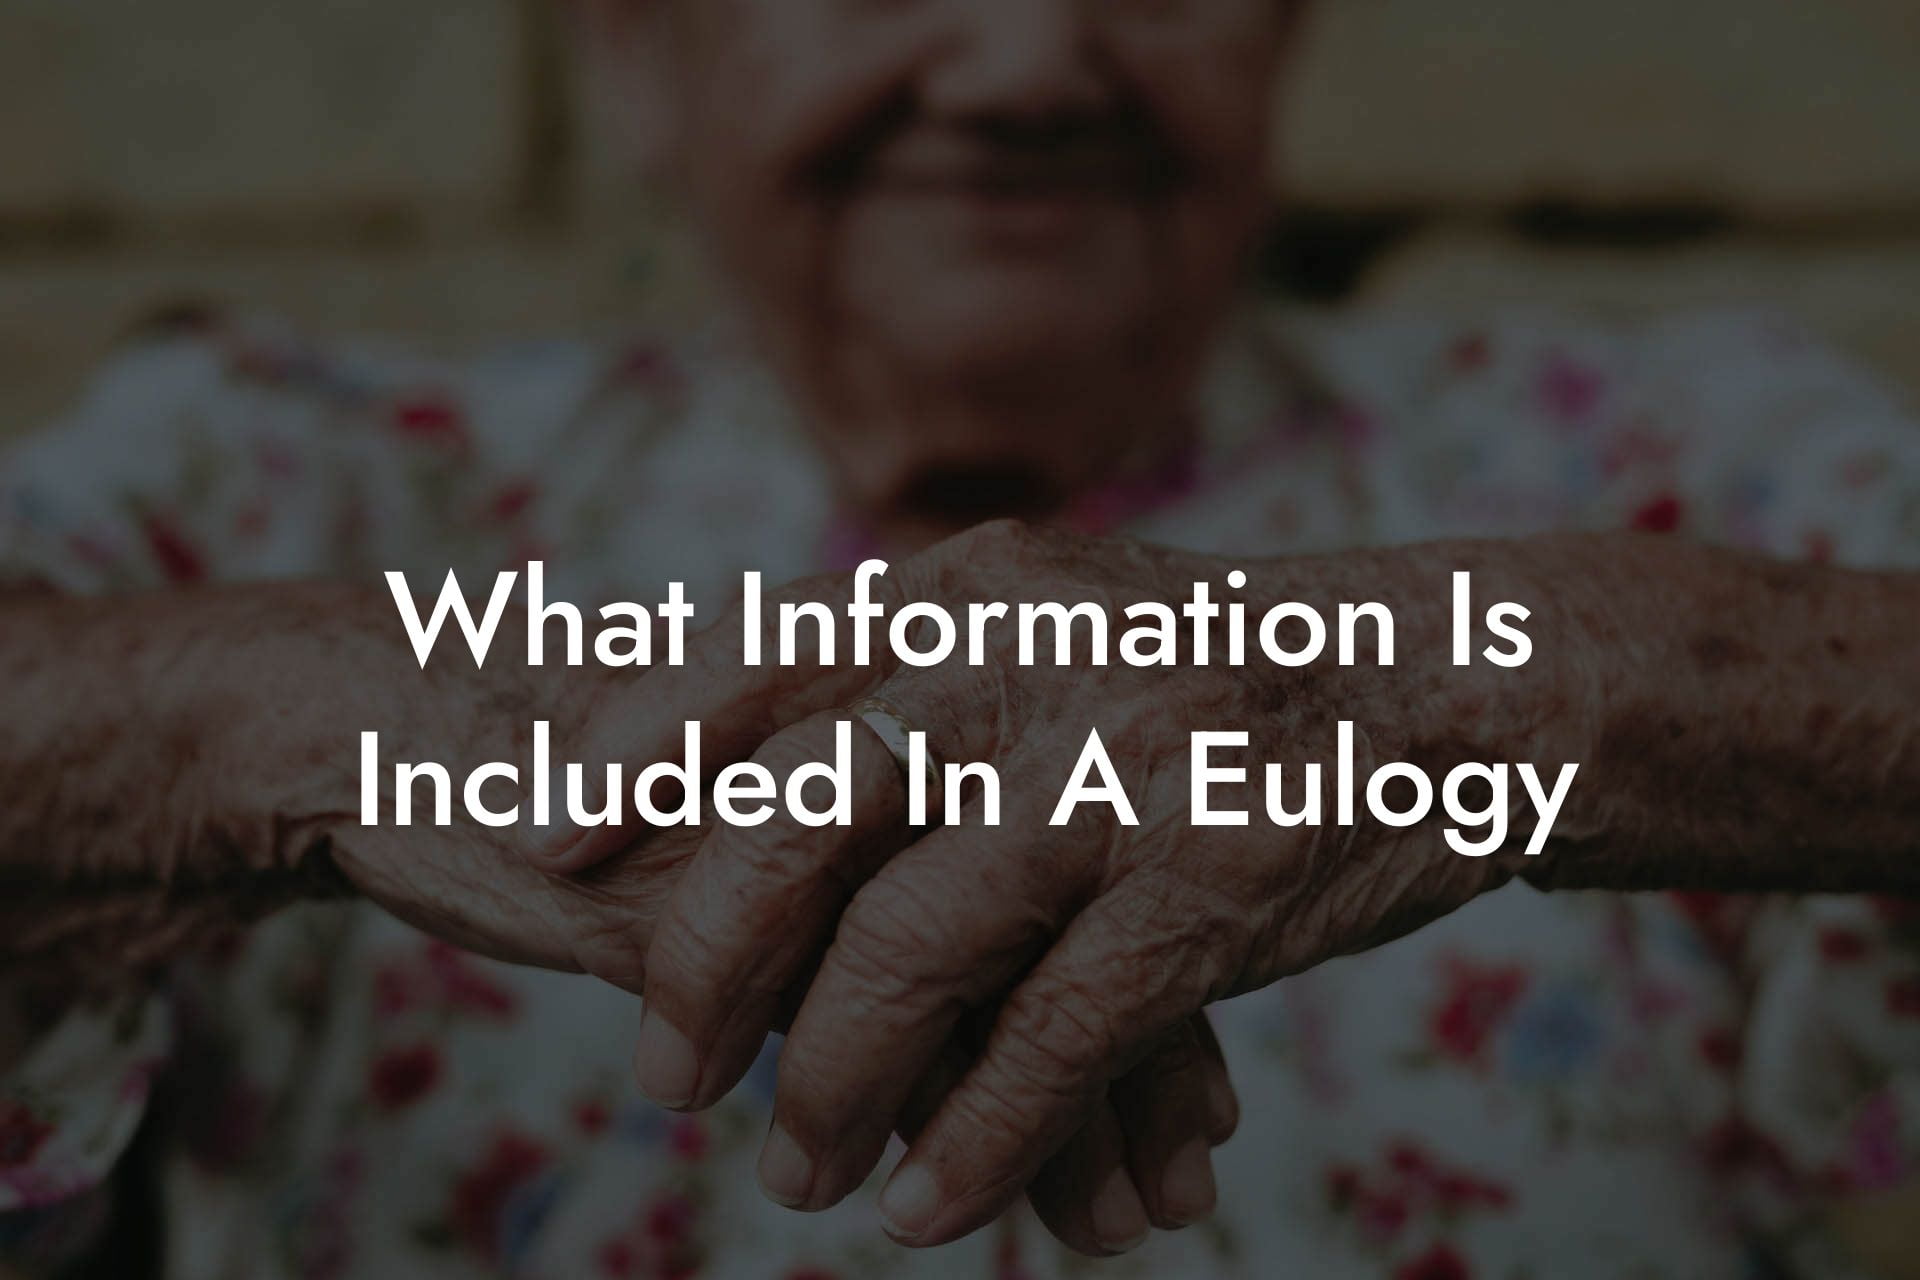 What Information Is Included In A Eulogy